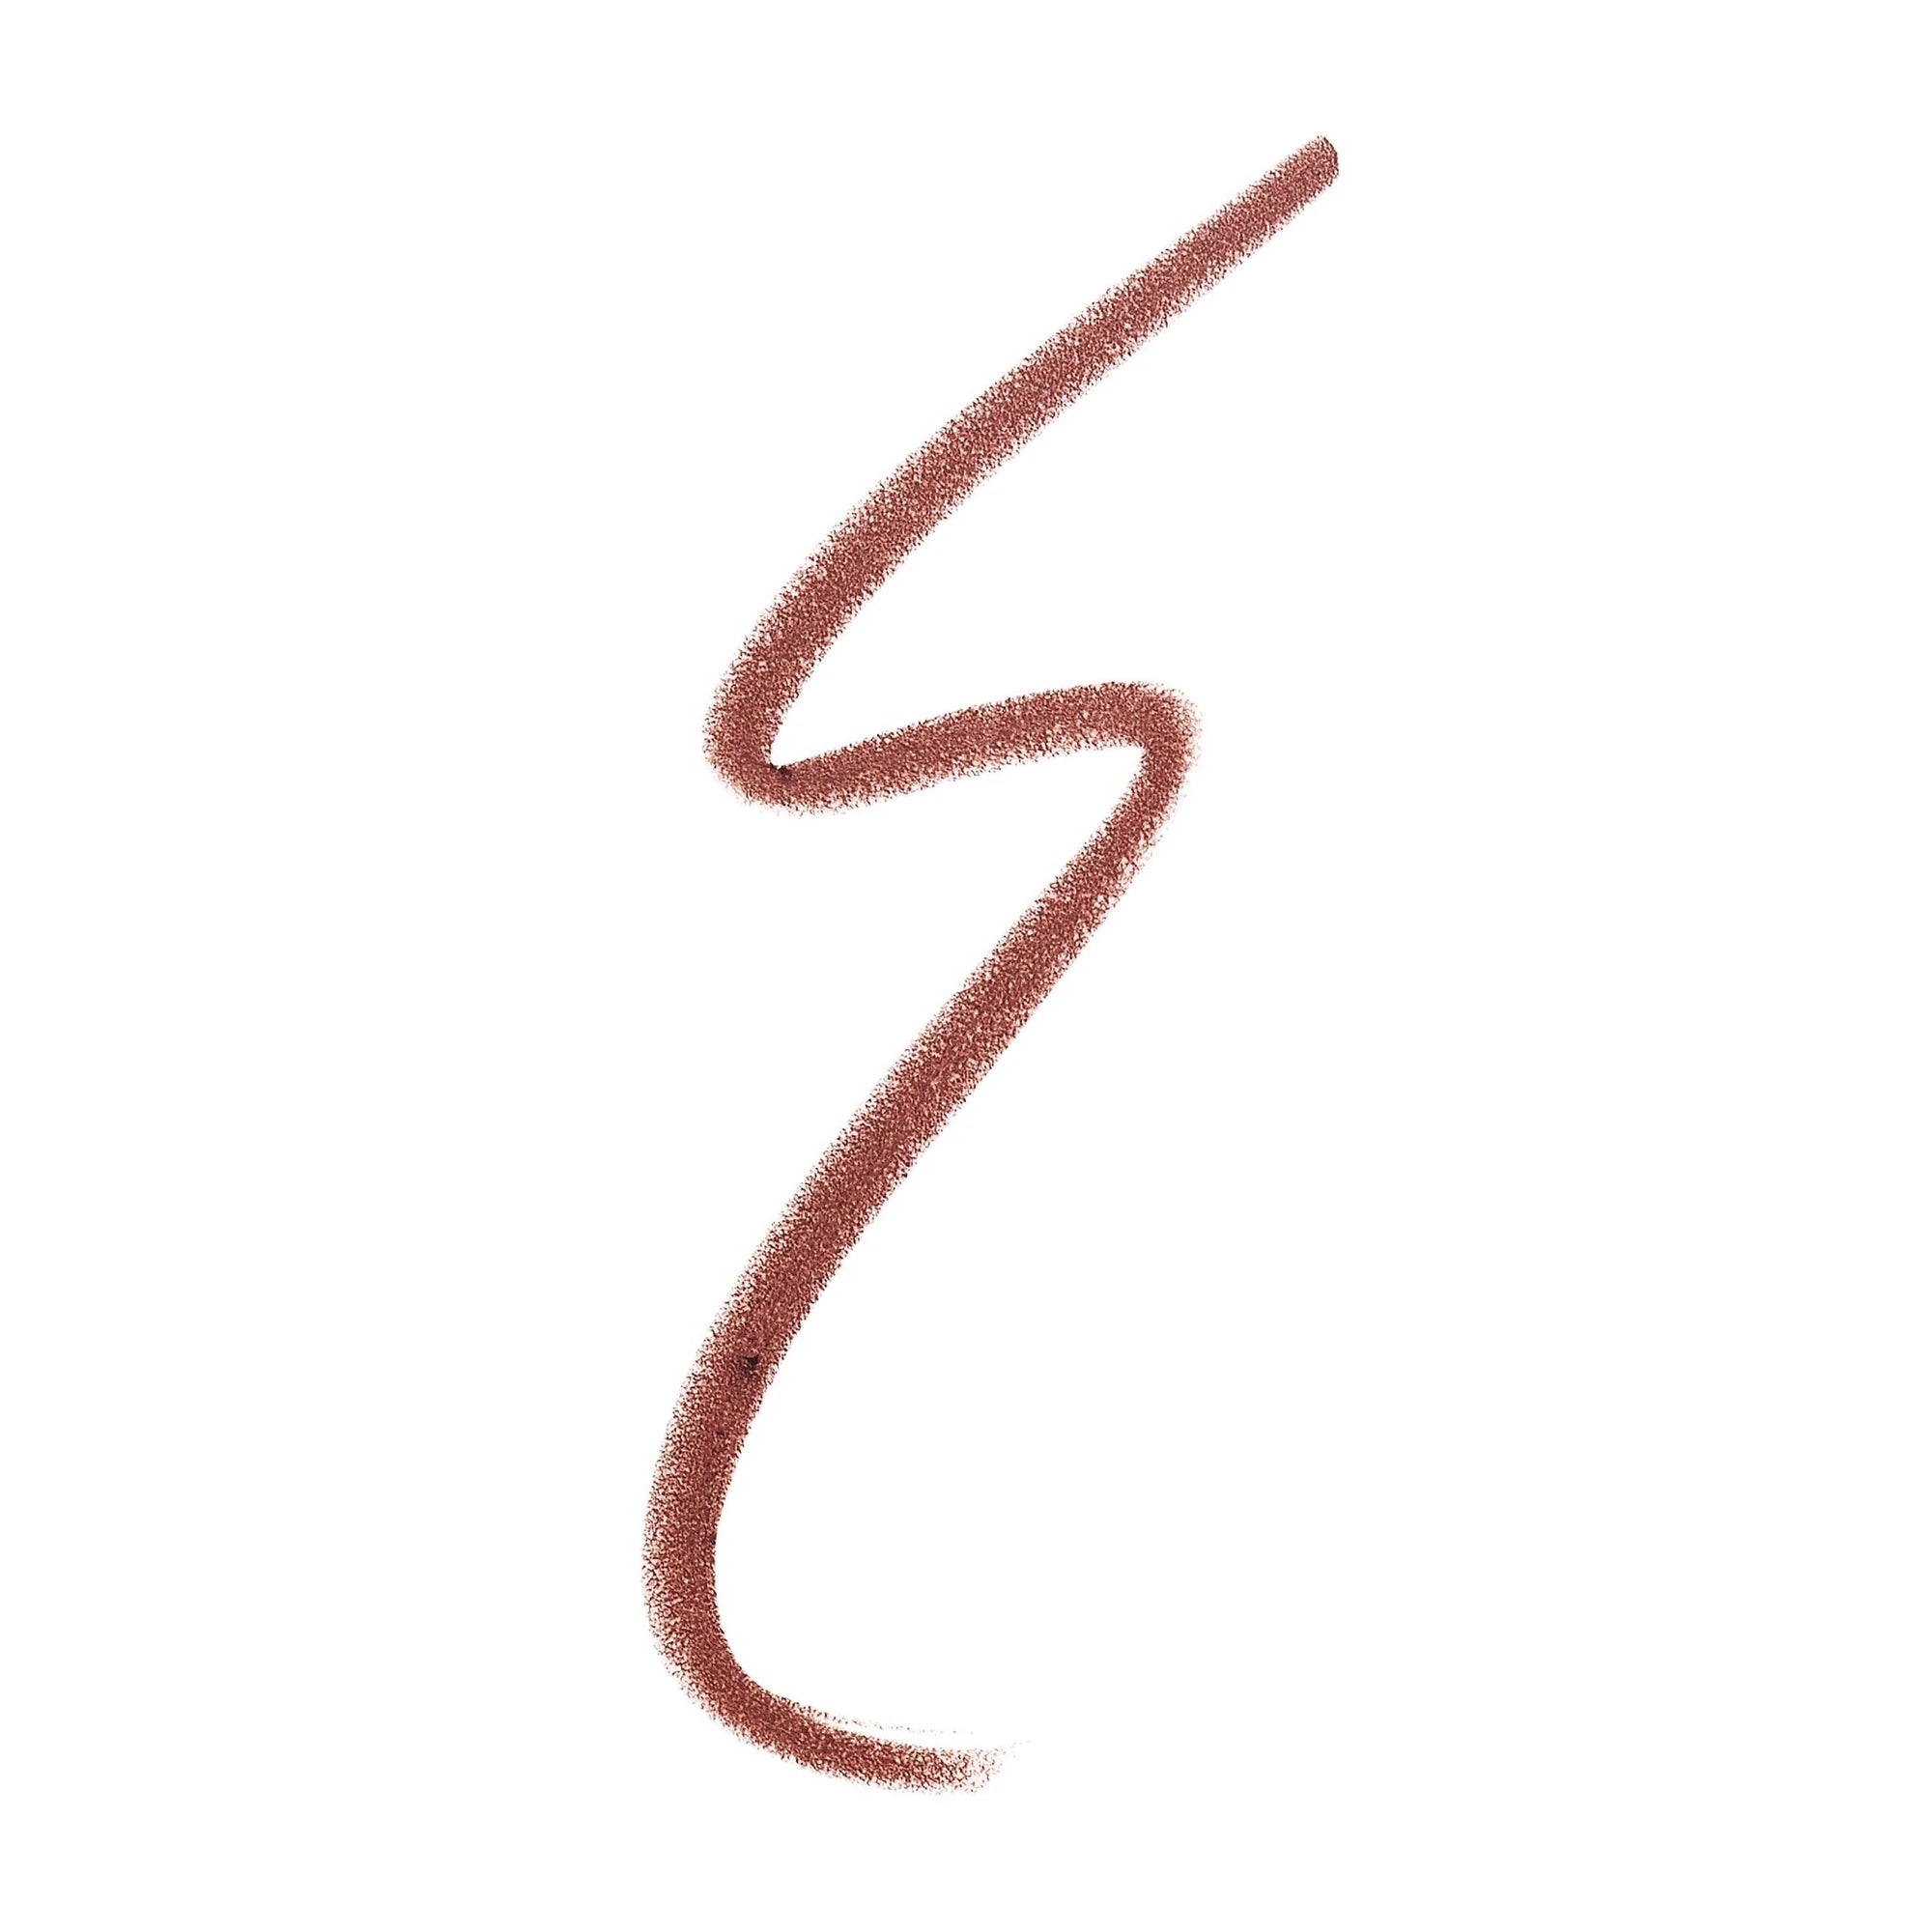 Jane Iredale's Retractable Brow Pencil - shade Brunette